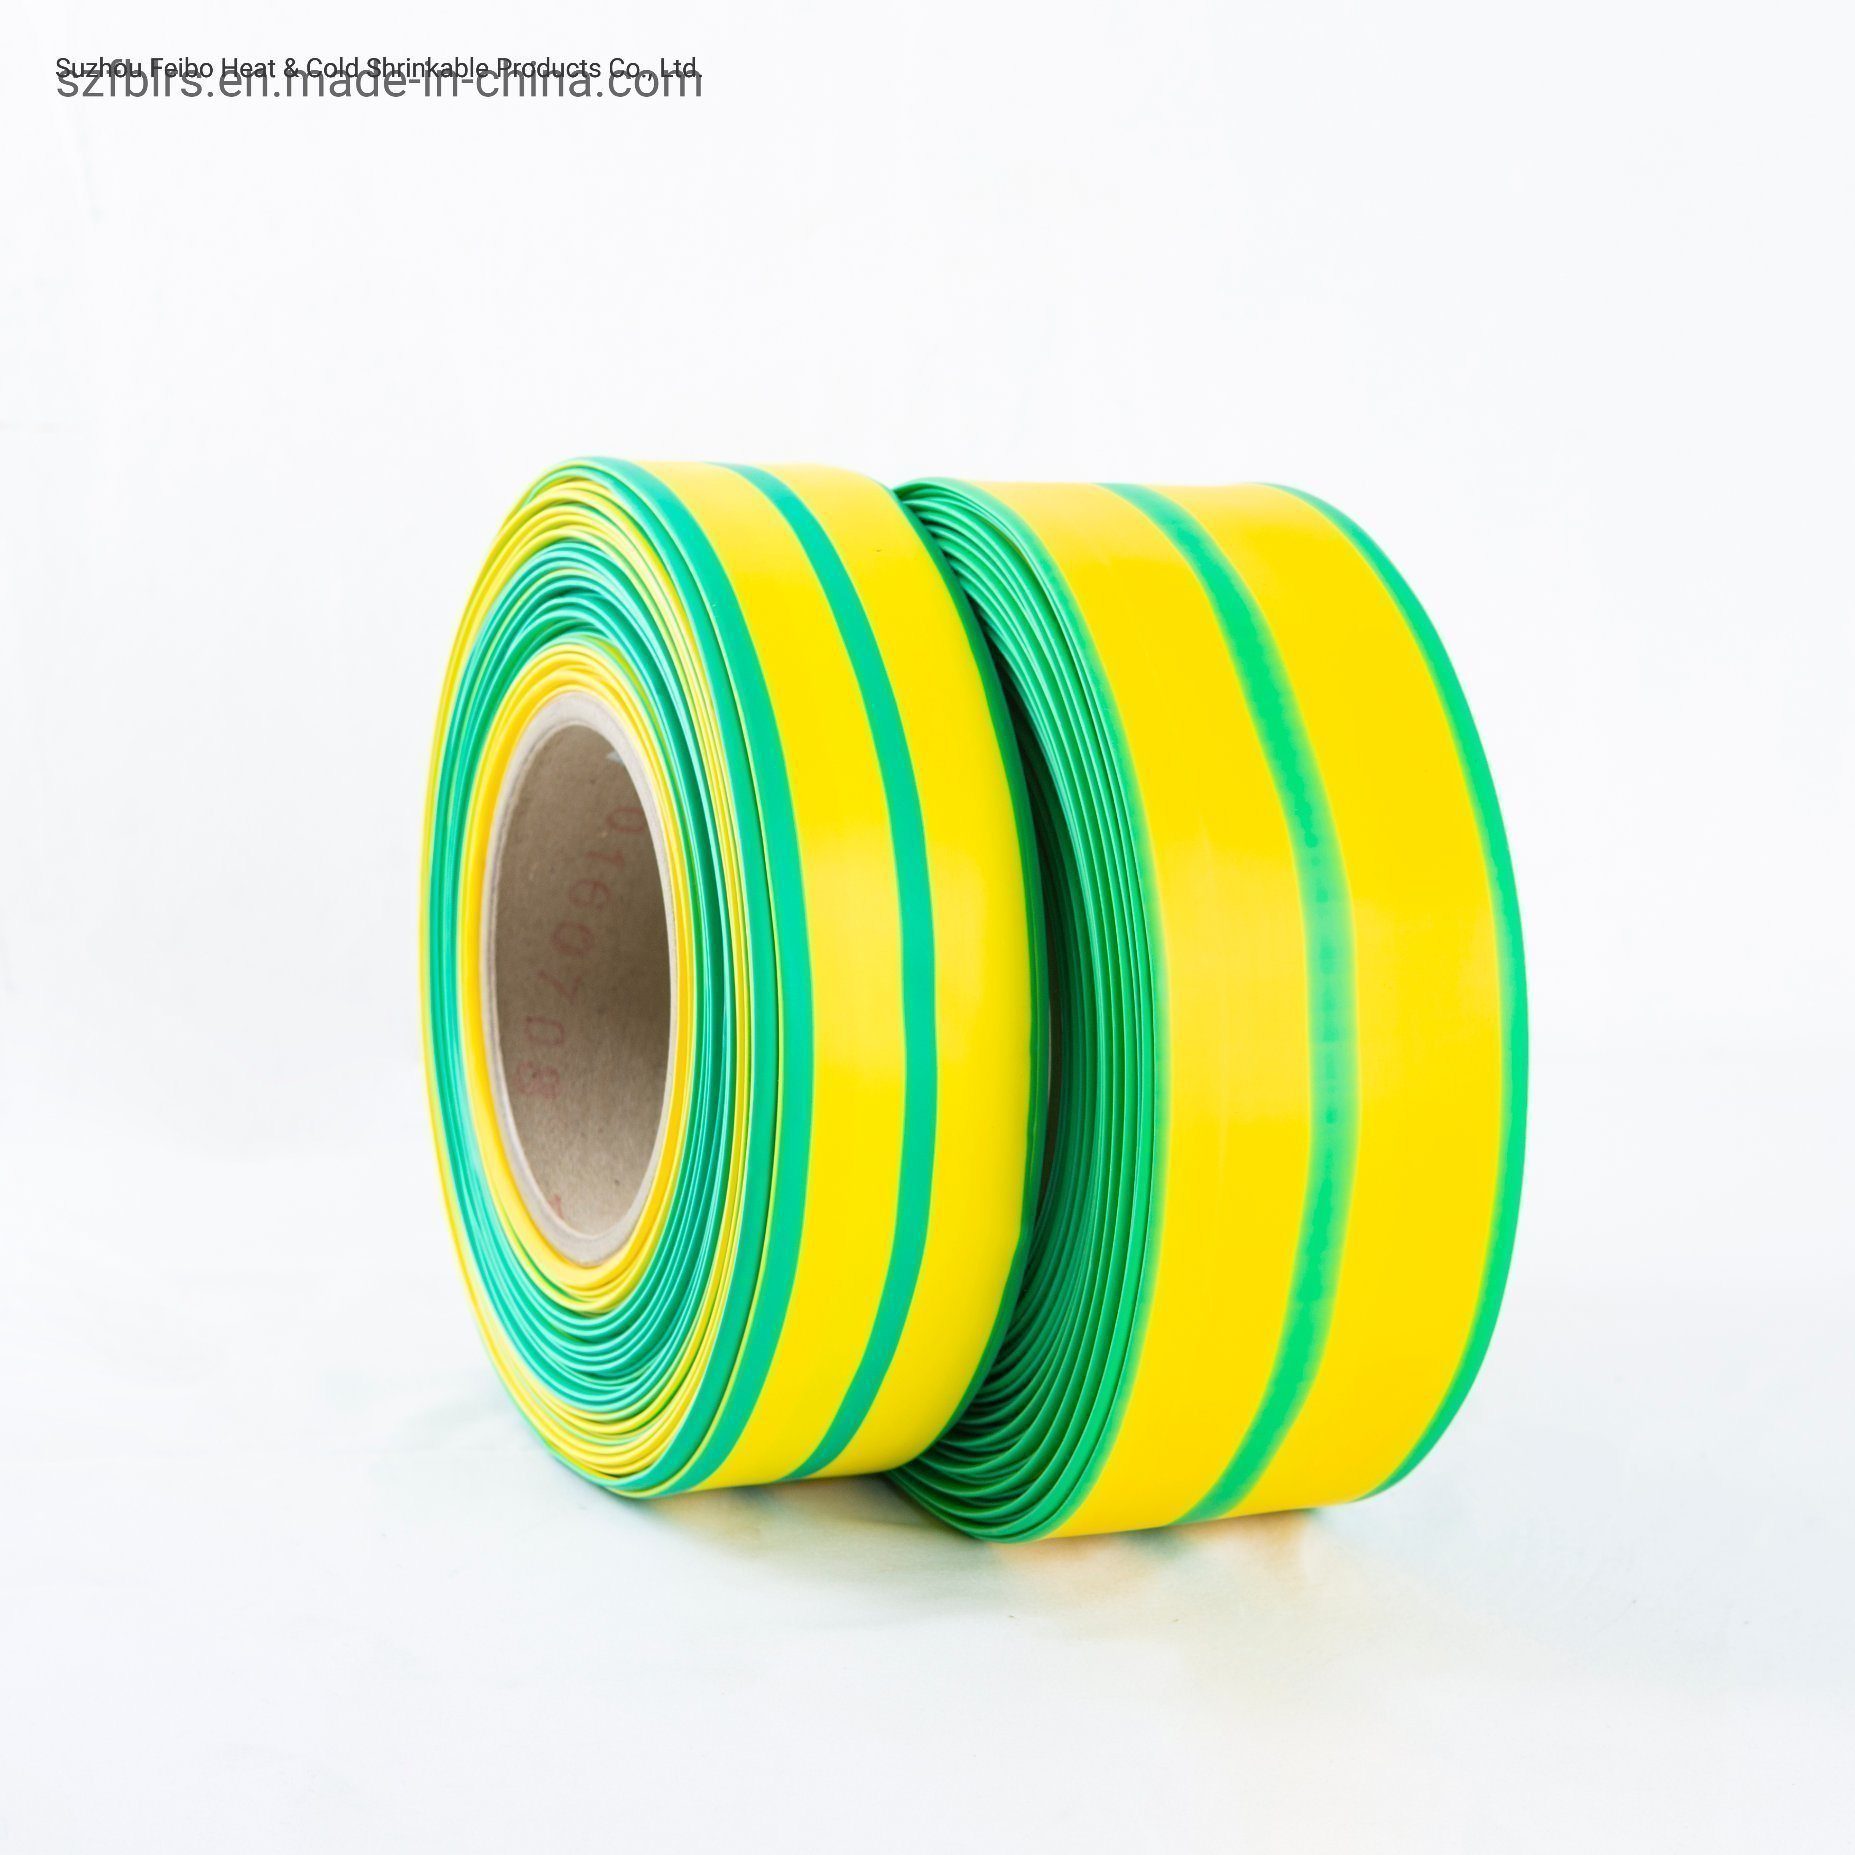 Heat Shrink Pipe Ground Cable Indicates That The Insulation Pipe Is Thickened